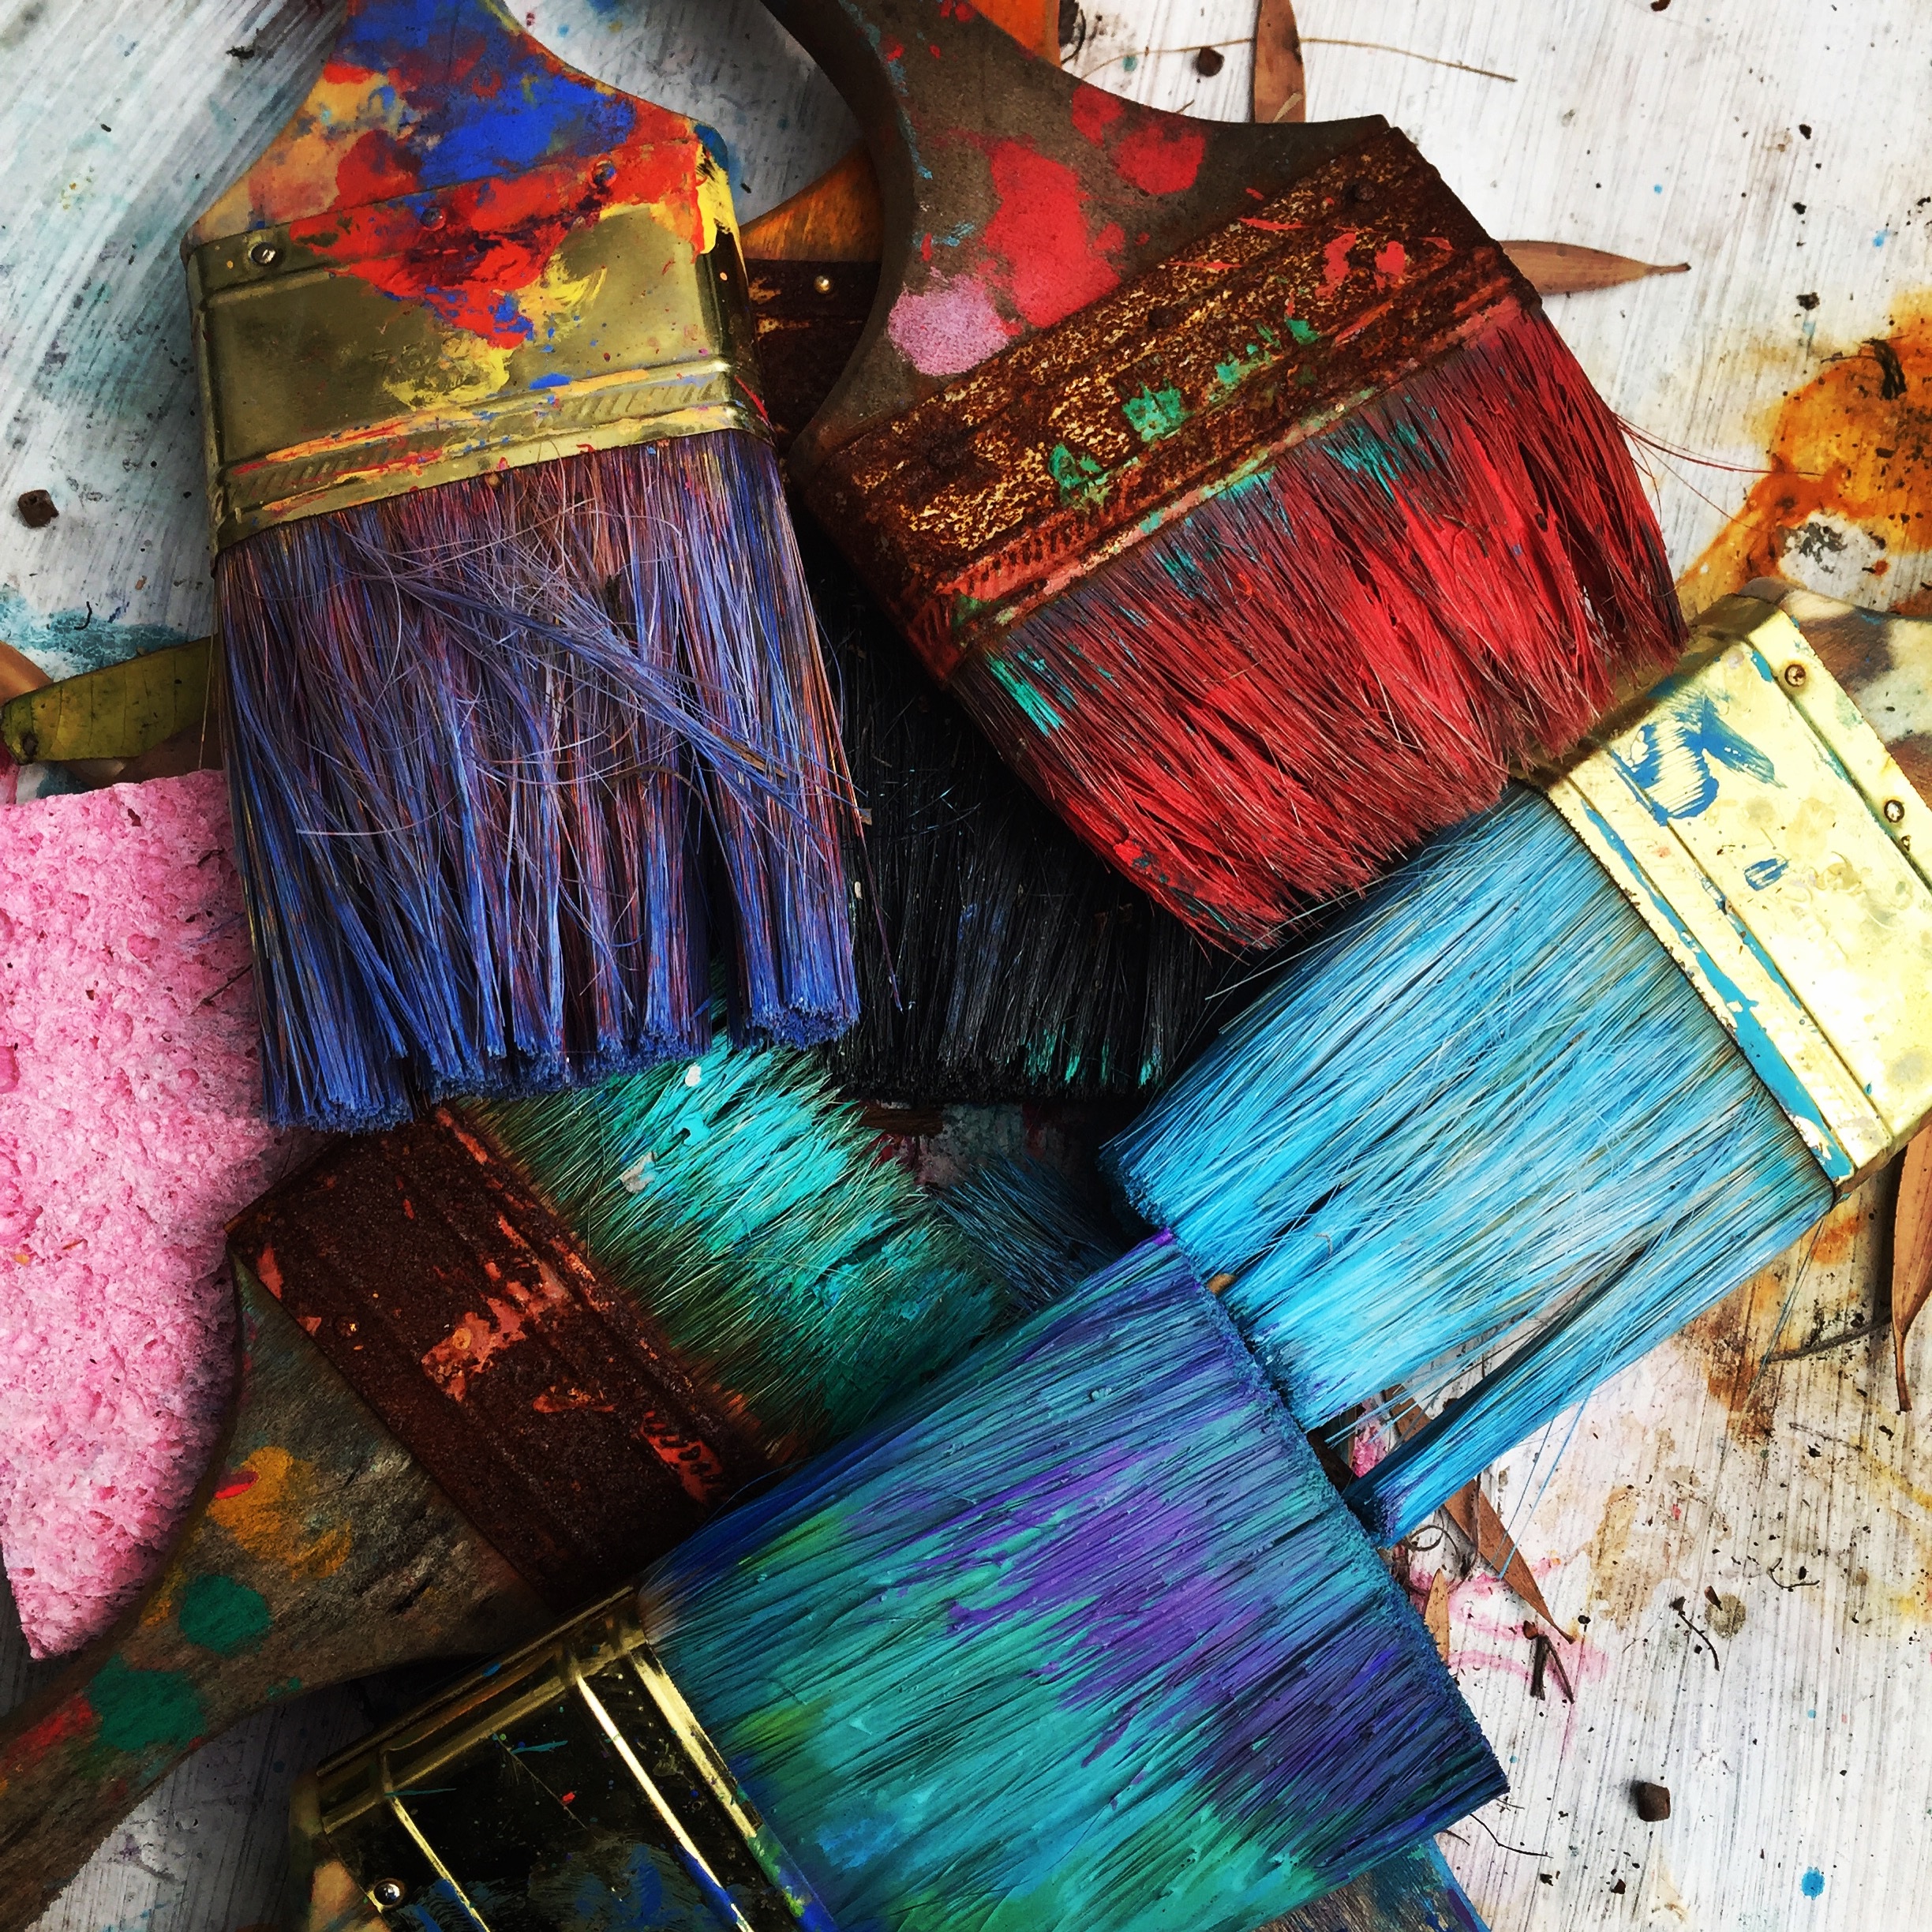 image of contrasting colors on paintbrushes to represent conflict in a group